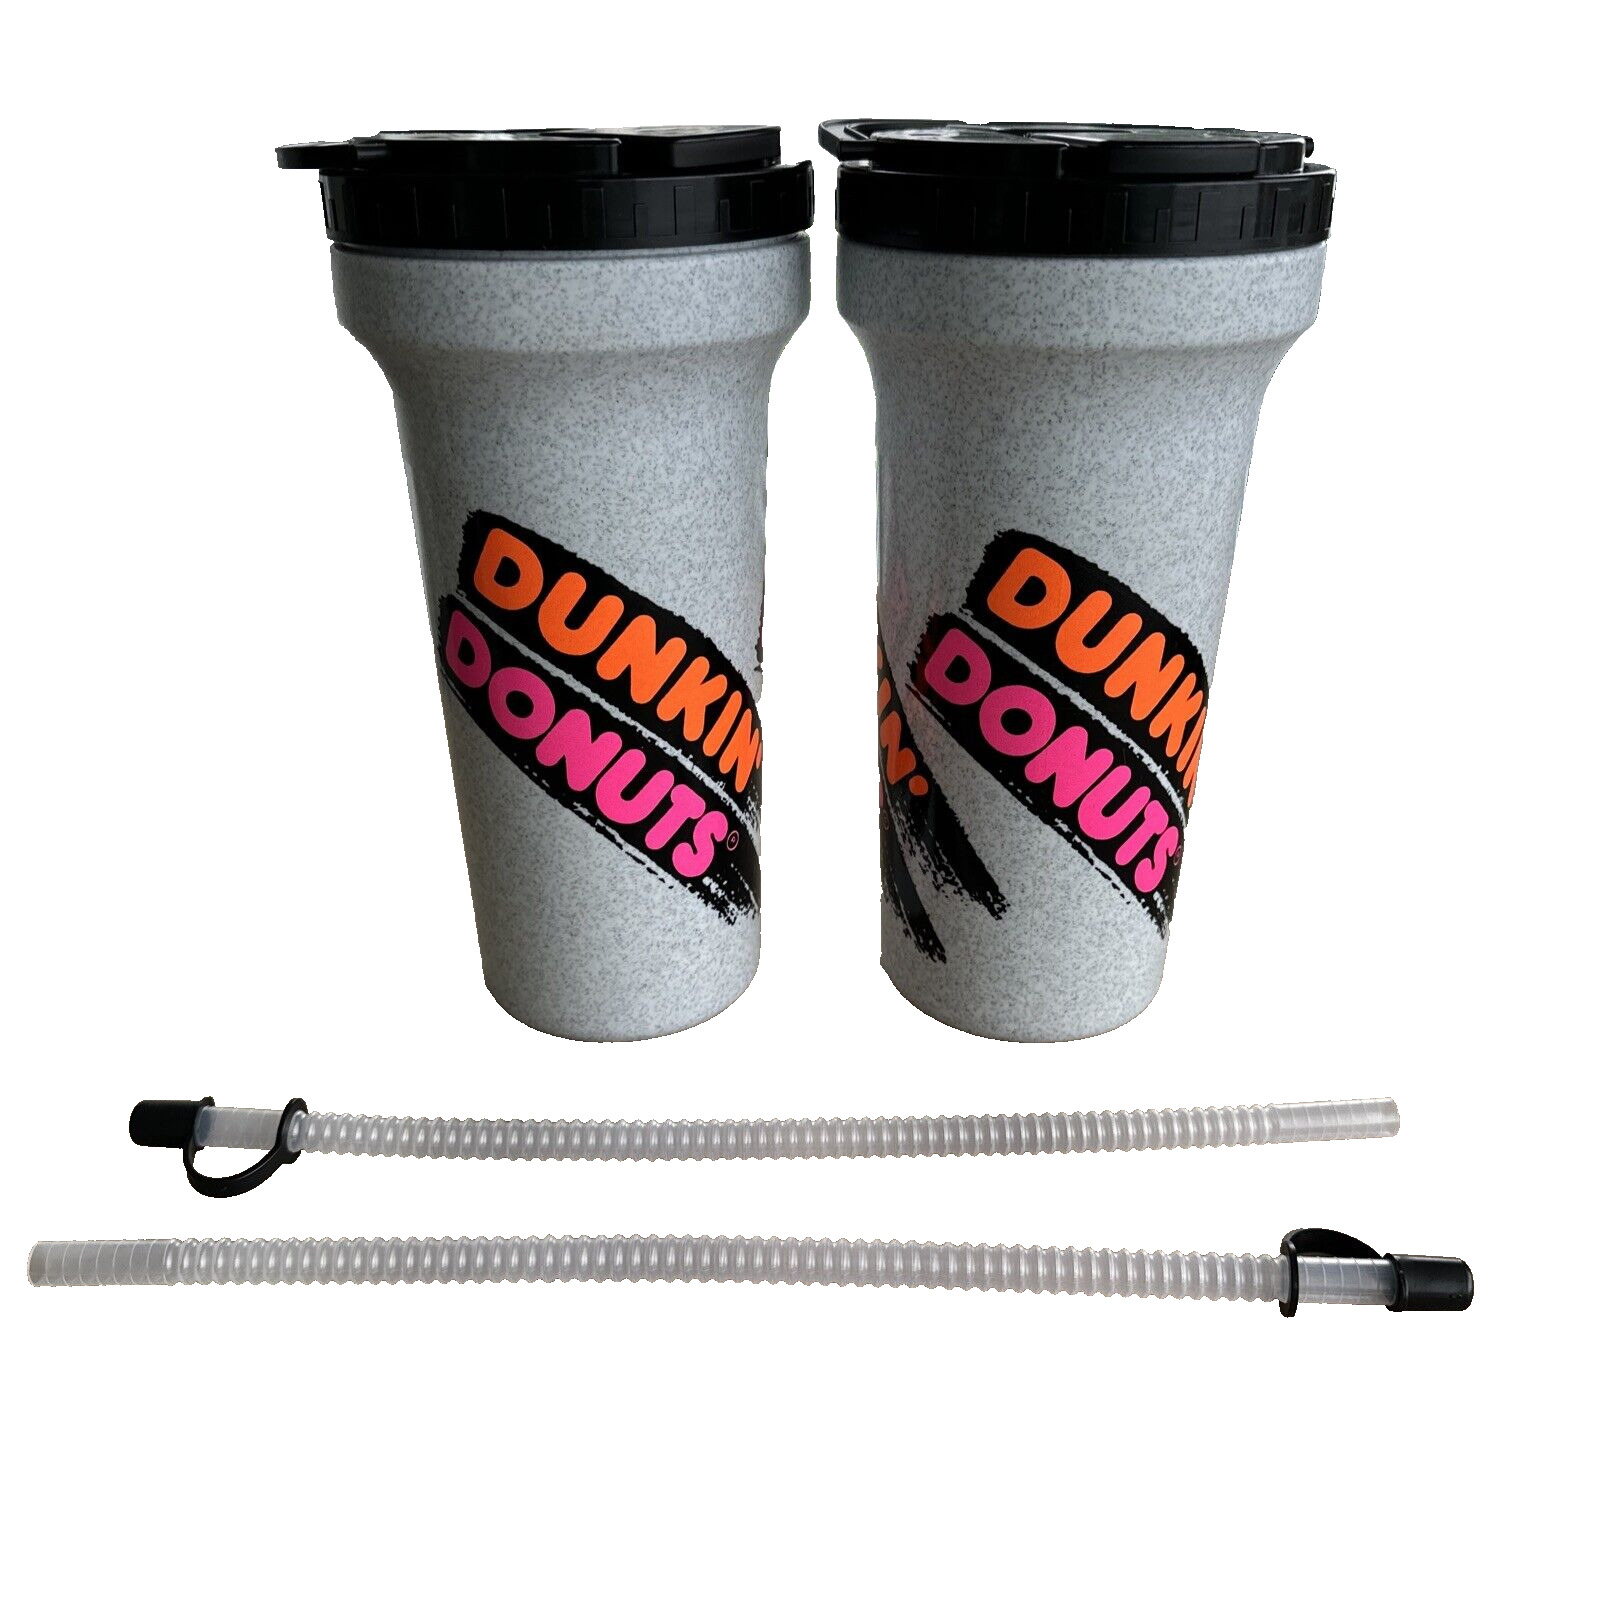 2 Vintage NOS Dunkin Donuts Cup Travel Tumbler w/ Straw & Lid Rare USA Betras